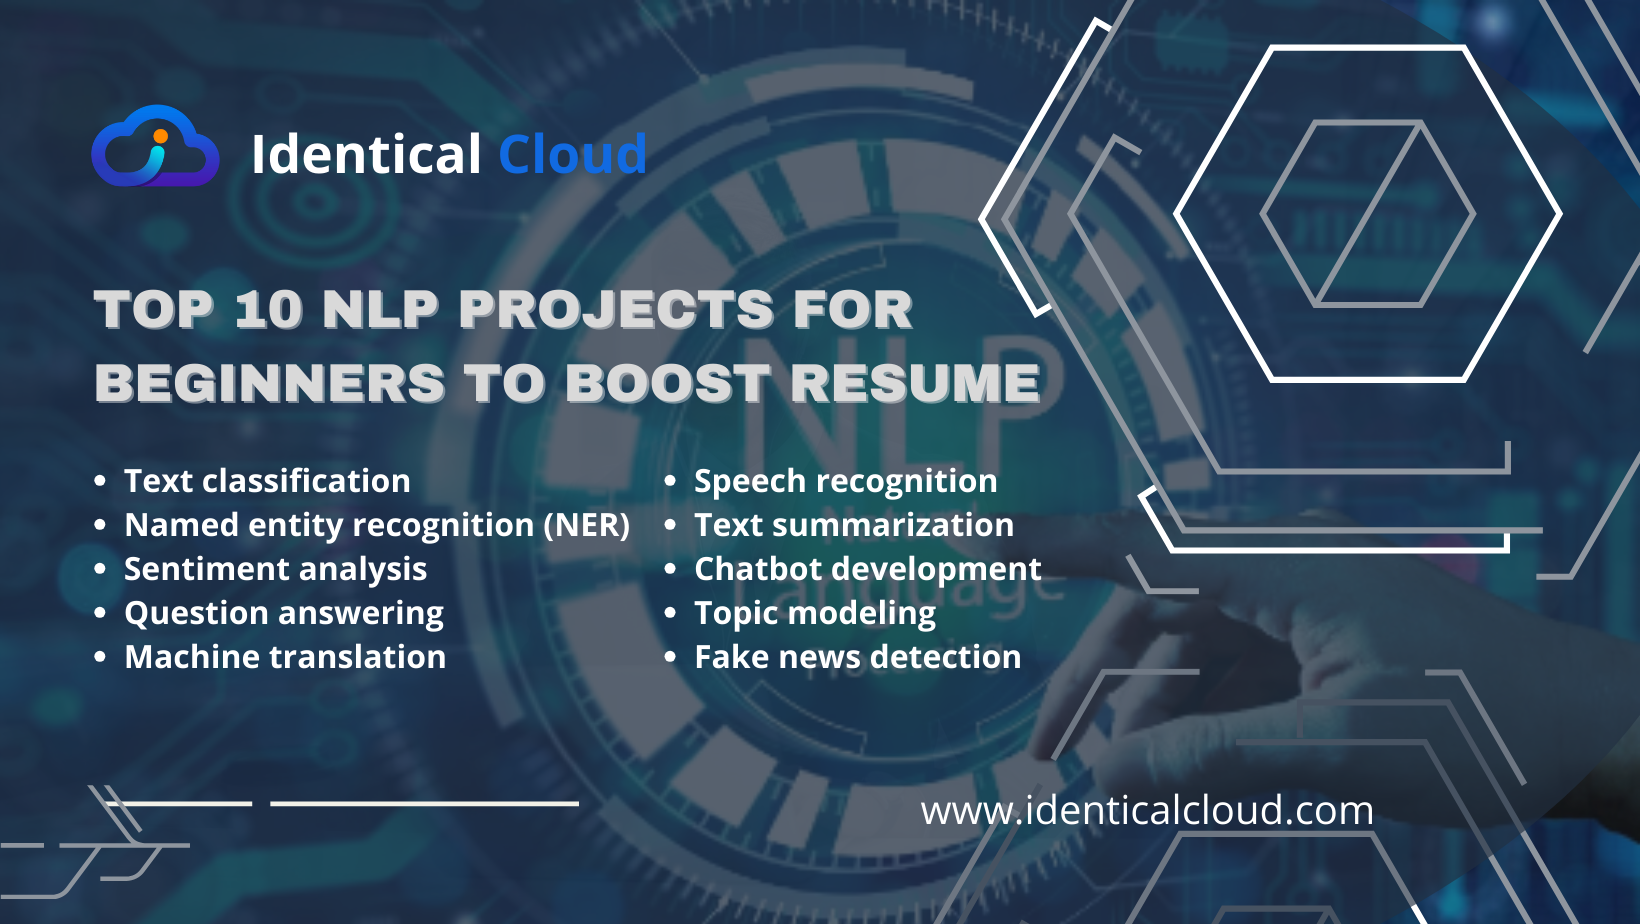 Top 10 NLP Projects For beginners to Boost Resume - identicalcloud.com